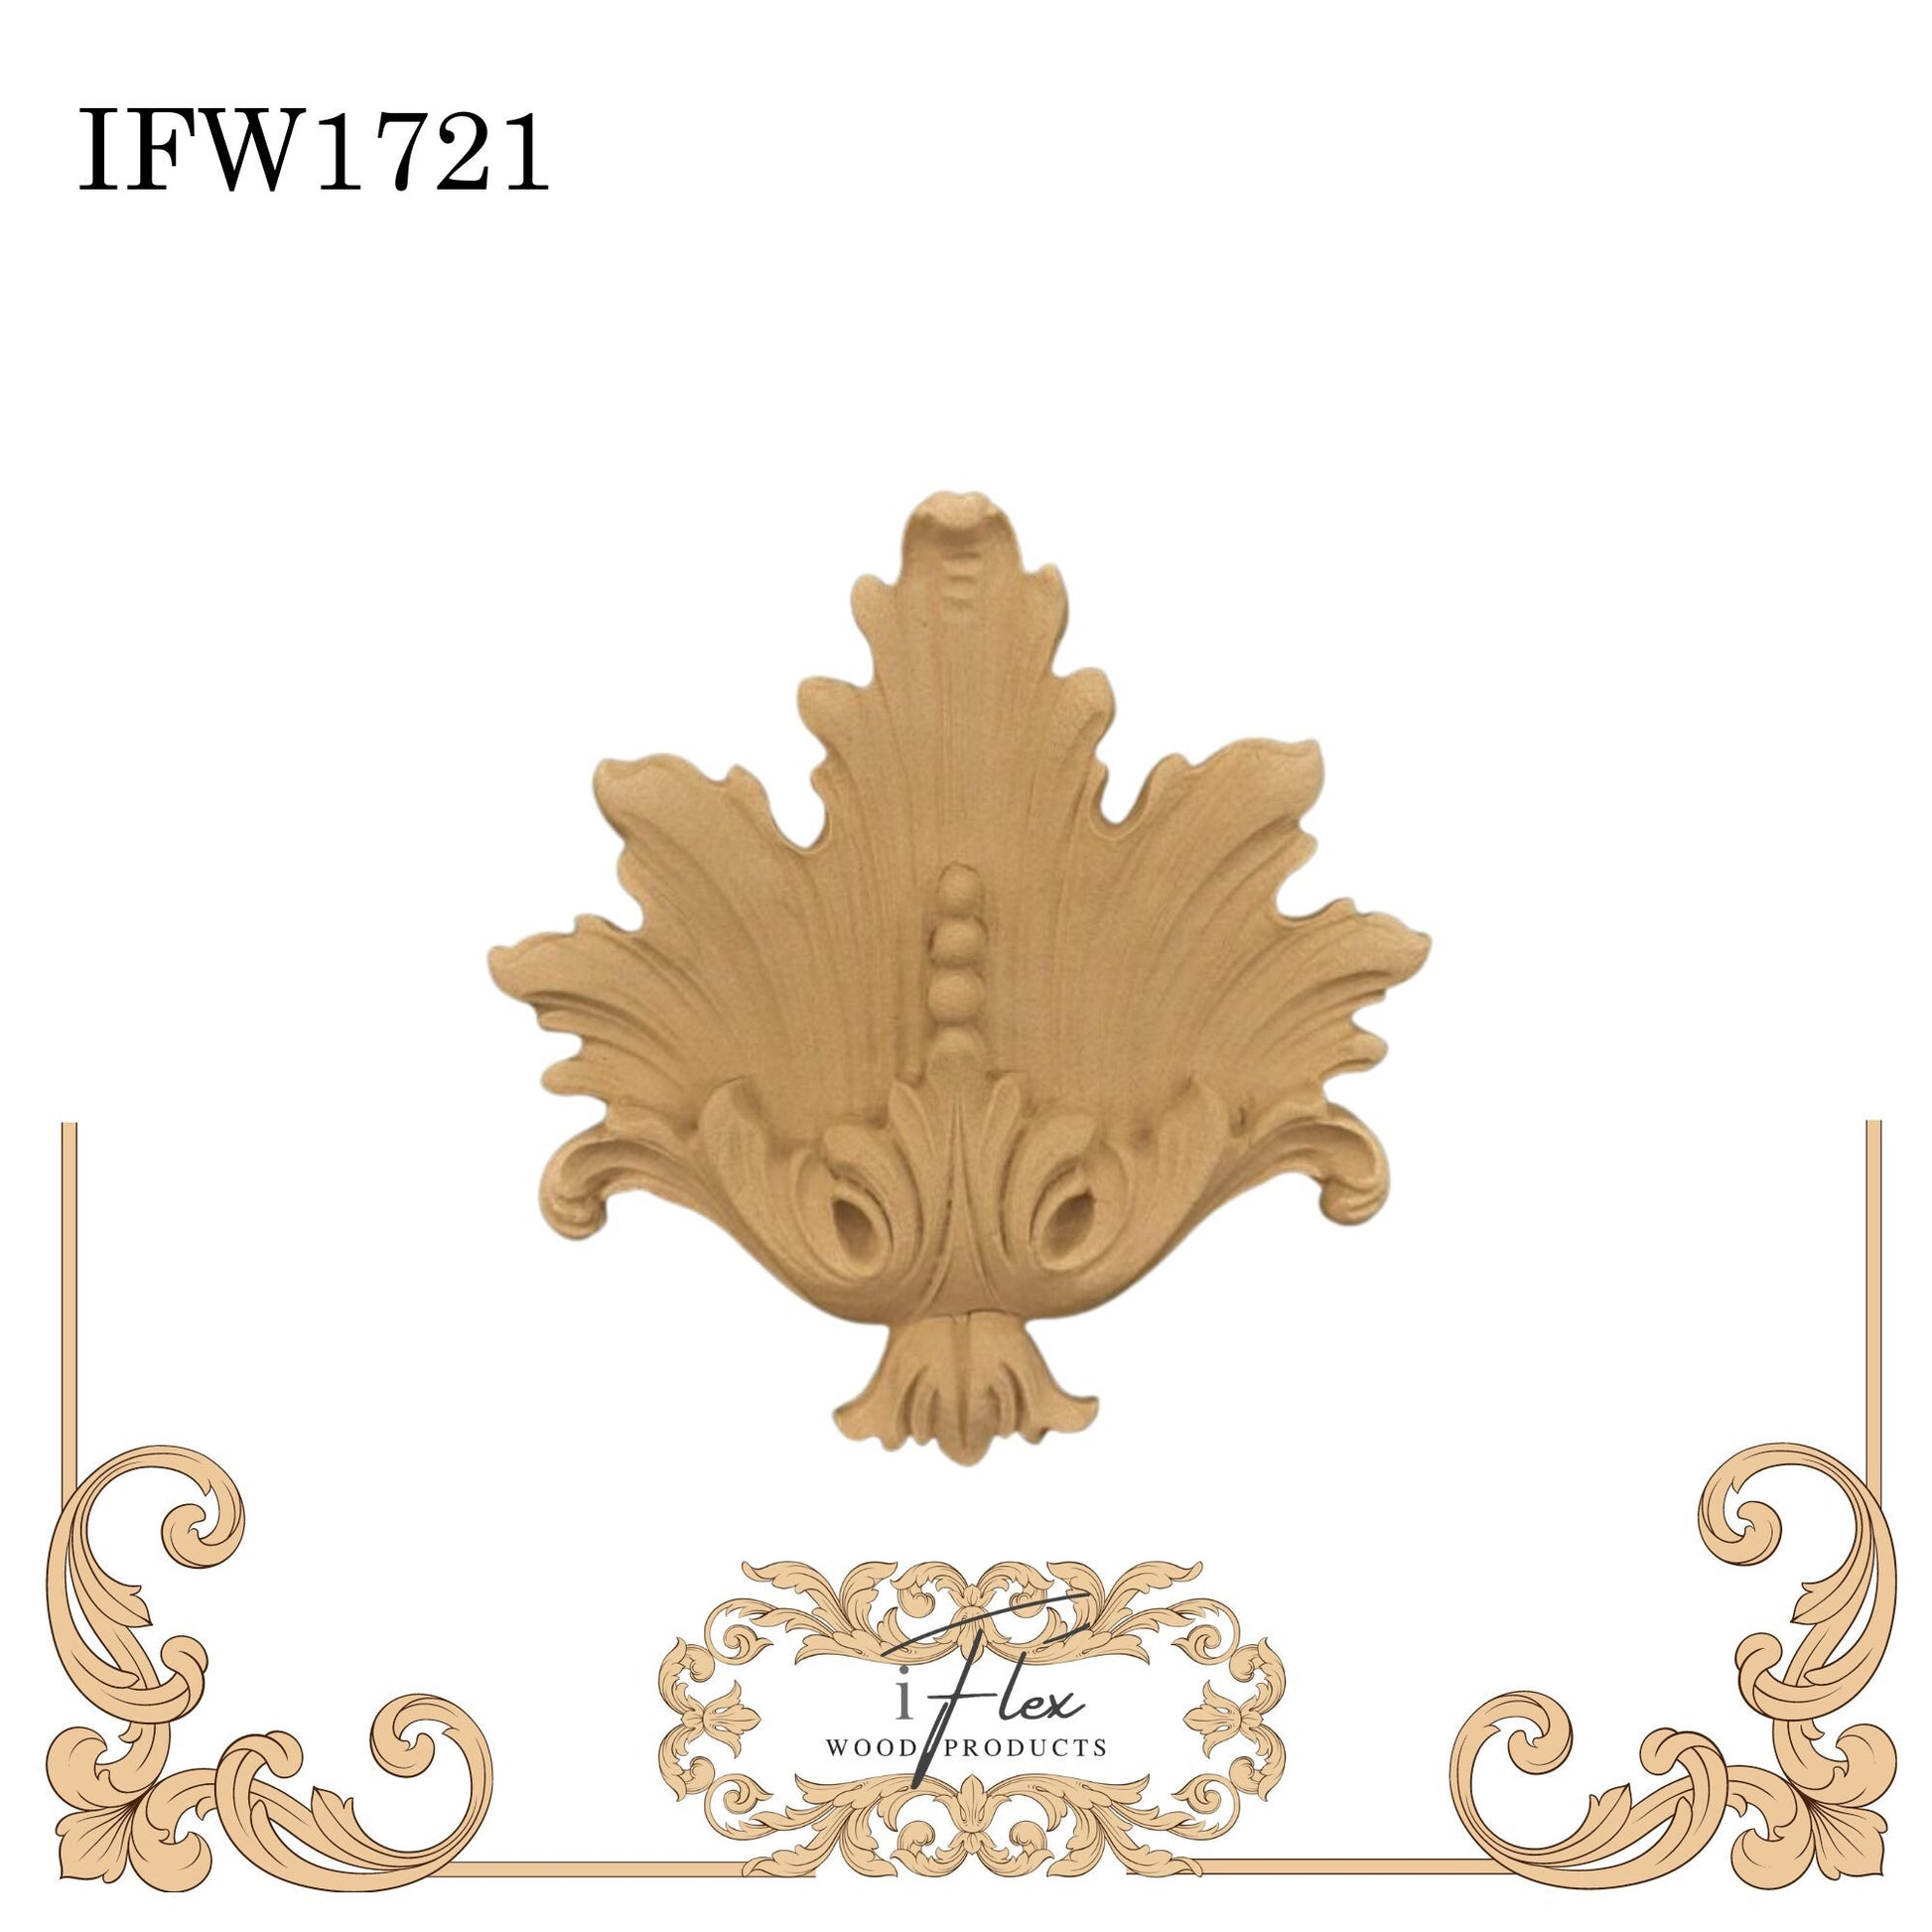 IFW 1721 iFlex Wood Products, bendable mouldings, flexible, wooden appliques, plume